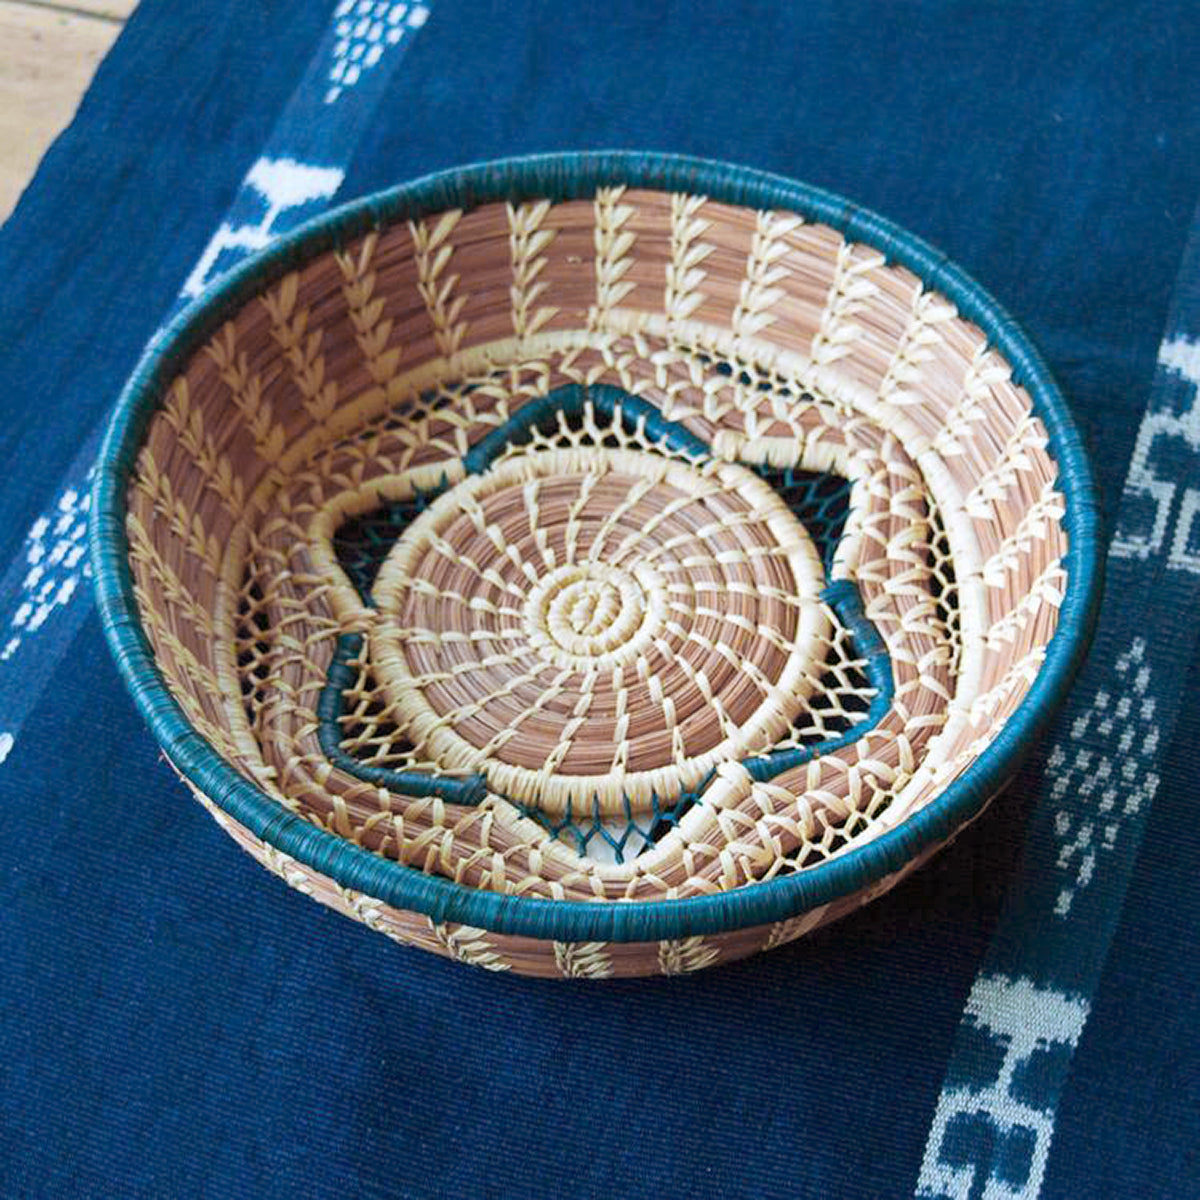 pine needle basket with blue star accent on table runner